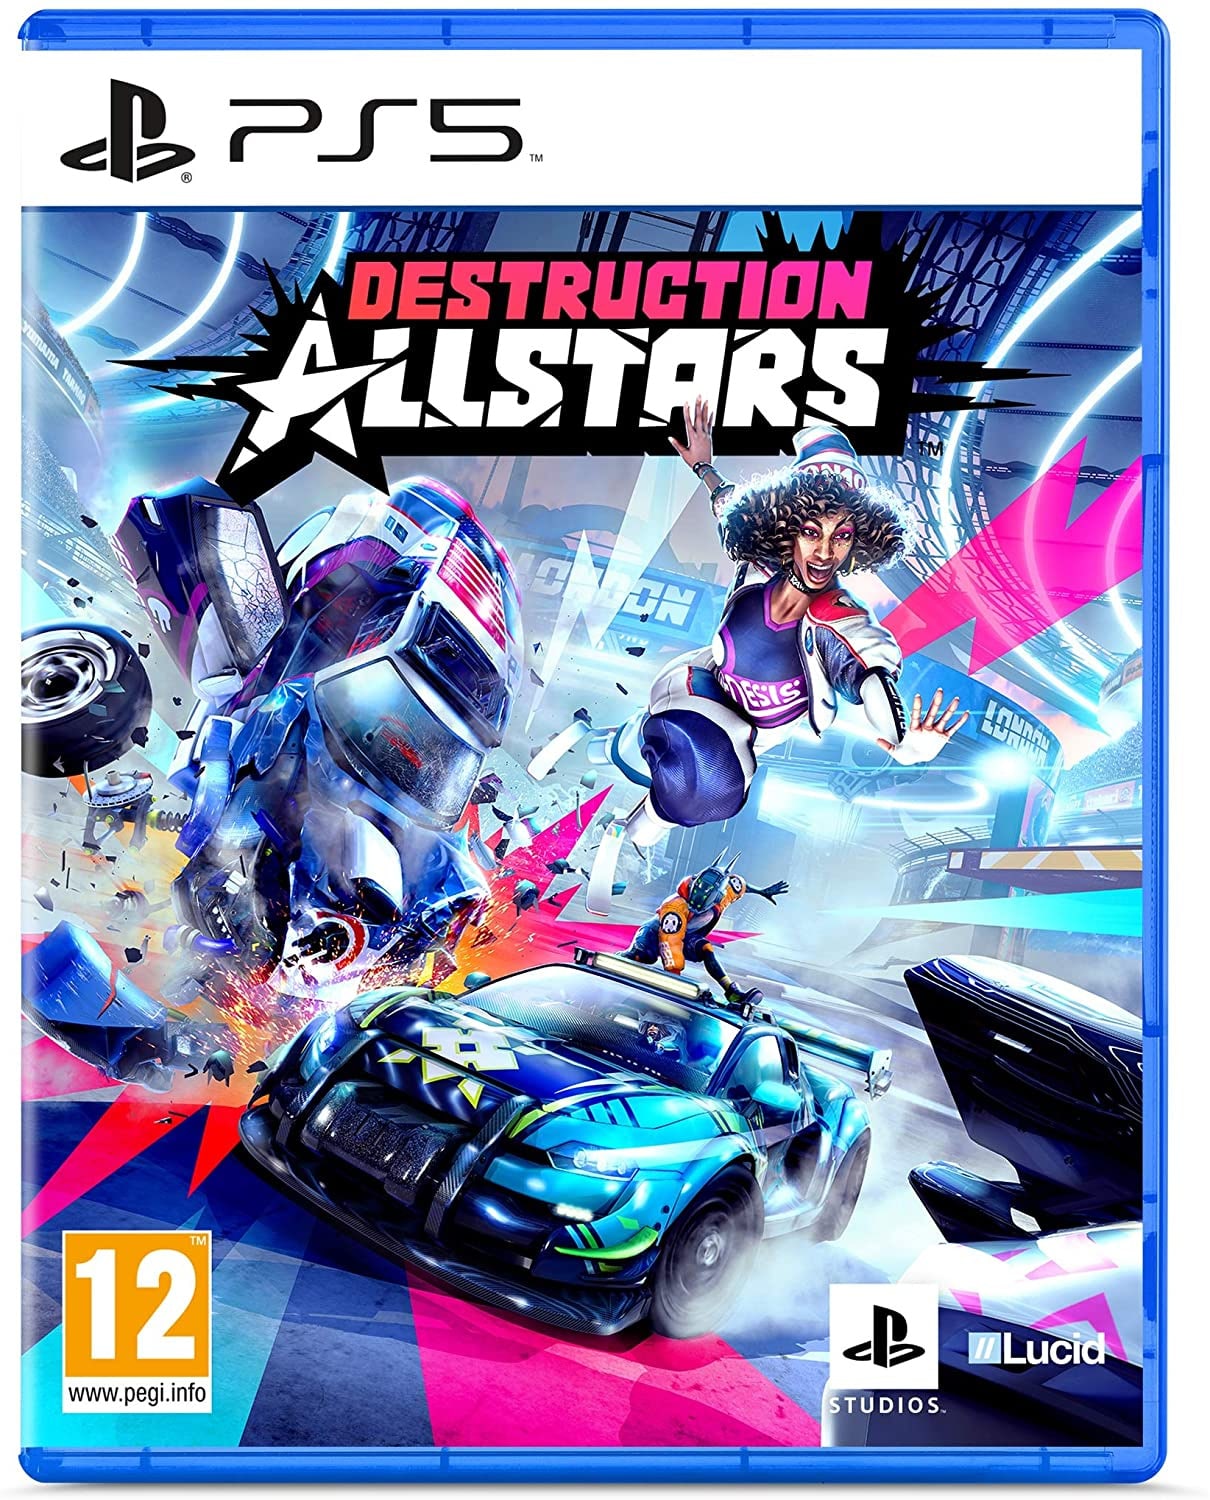 That PS5 Placeholder Box Art Turned Out to Be the Real Thing